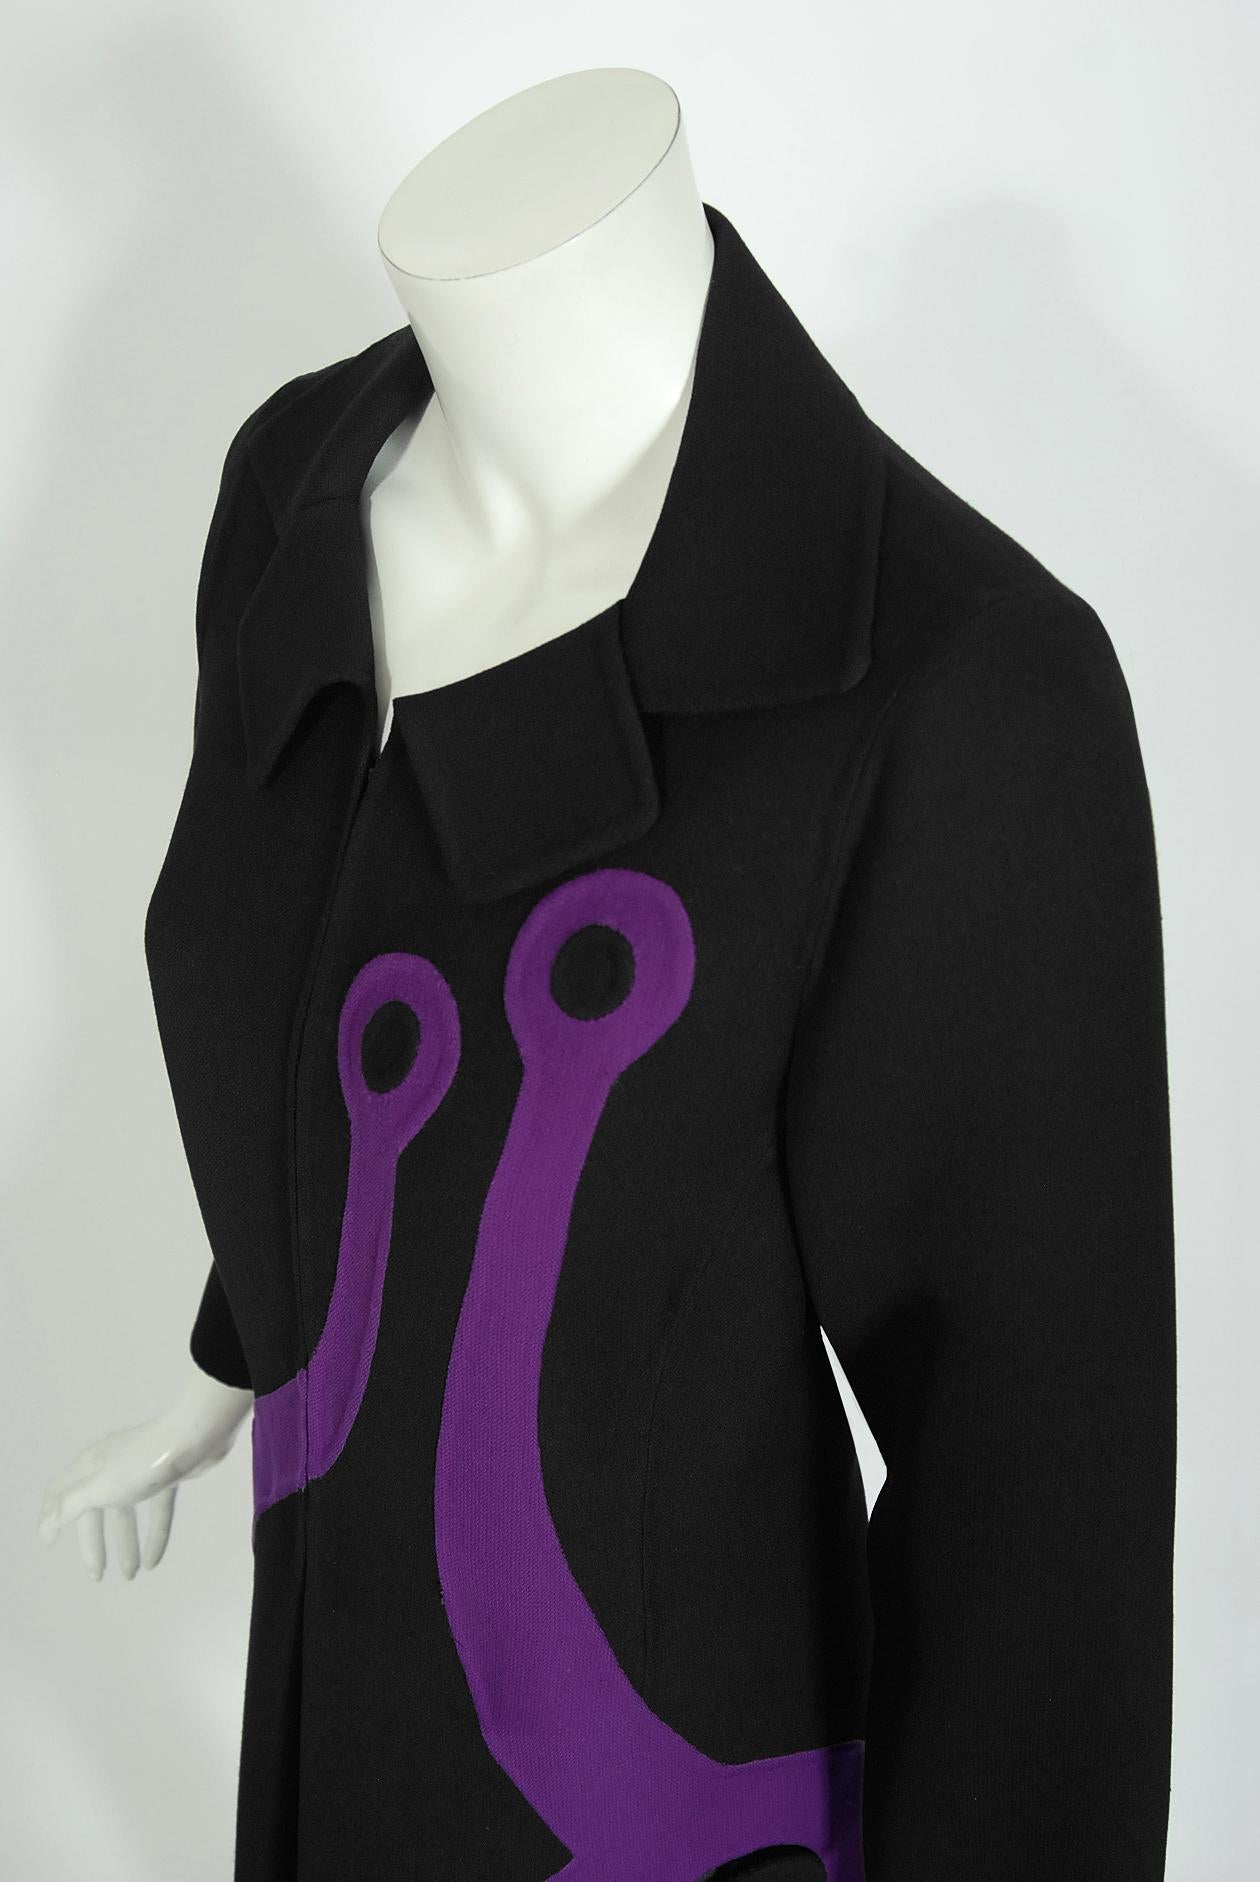 Vintage 1969 Mila Schön Italian Couture Black Purple Wool Mod Target Coat Dress In Good Condition For Sale In Beverly Hills, CA